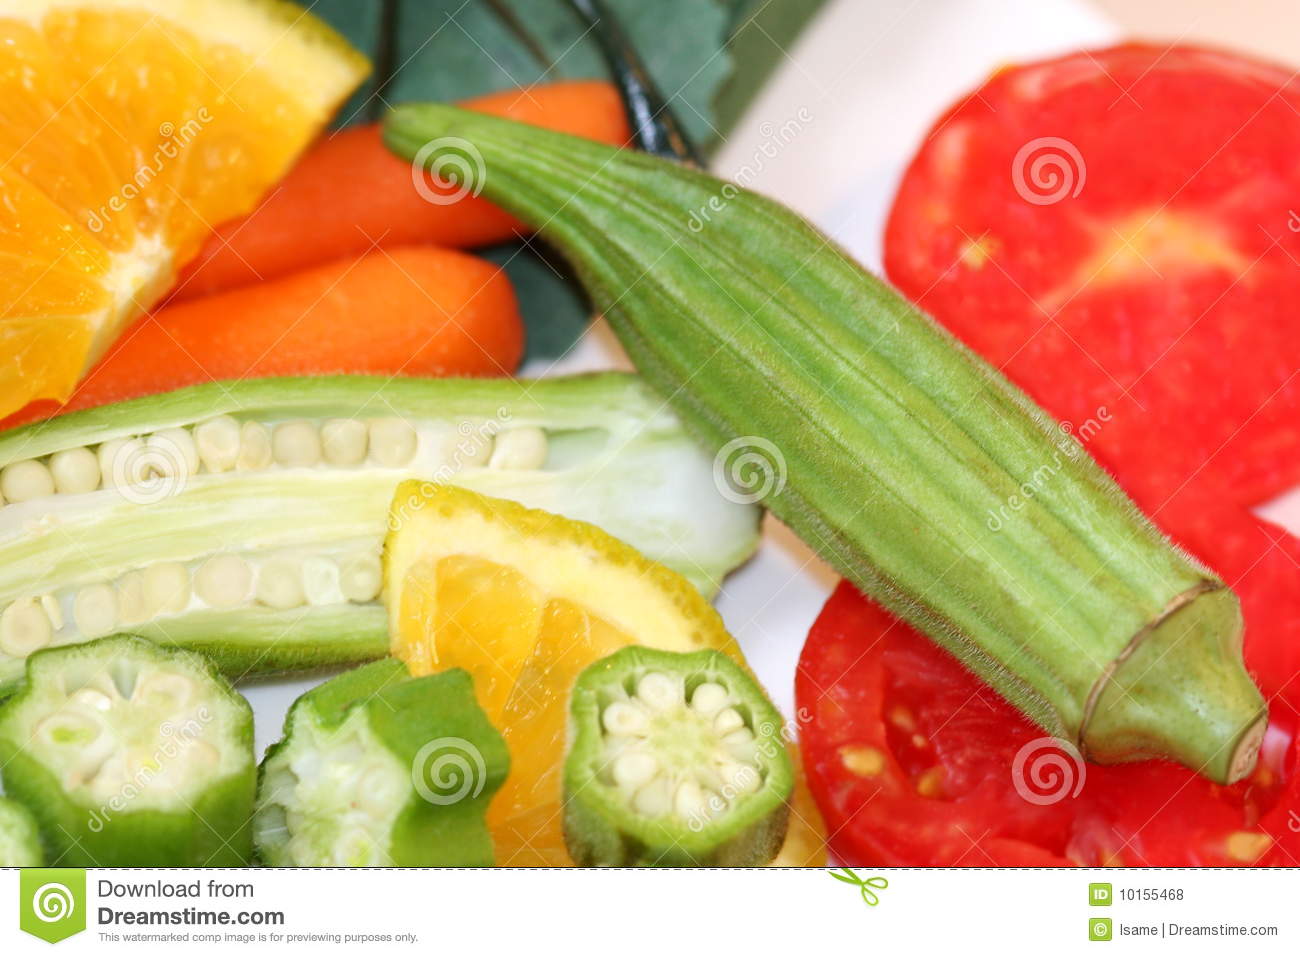 Freshly Cut Okra And Tomatoes Royalty Free Stock Photos   Image